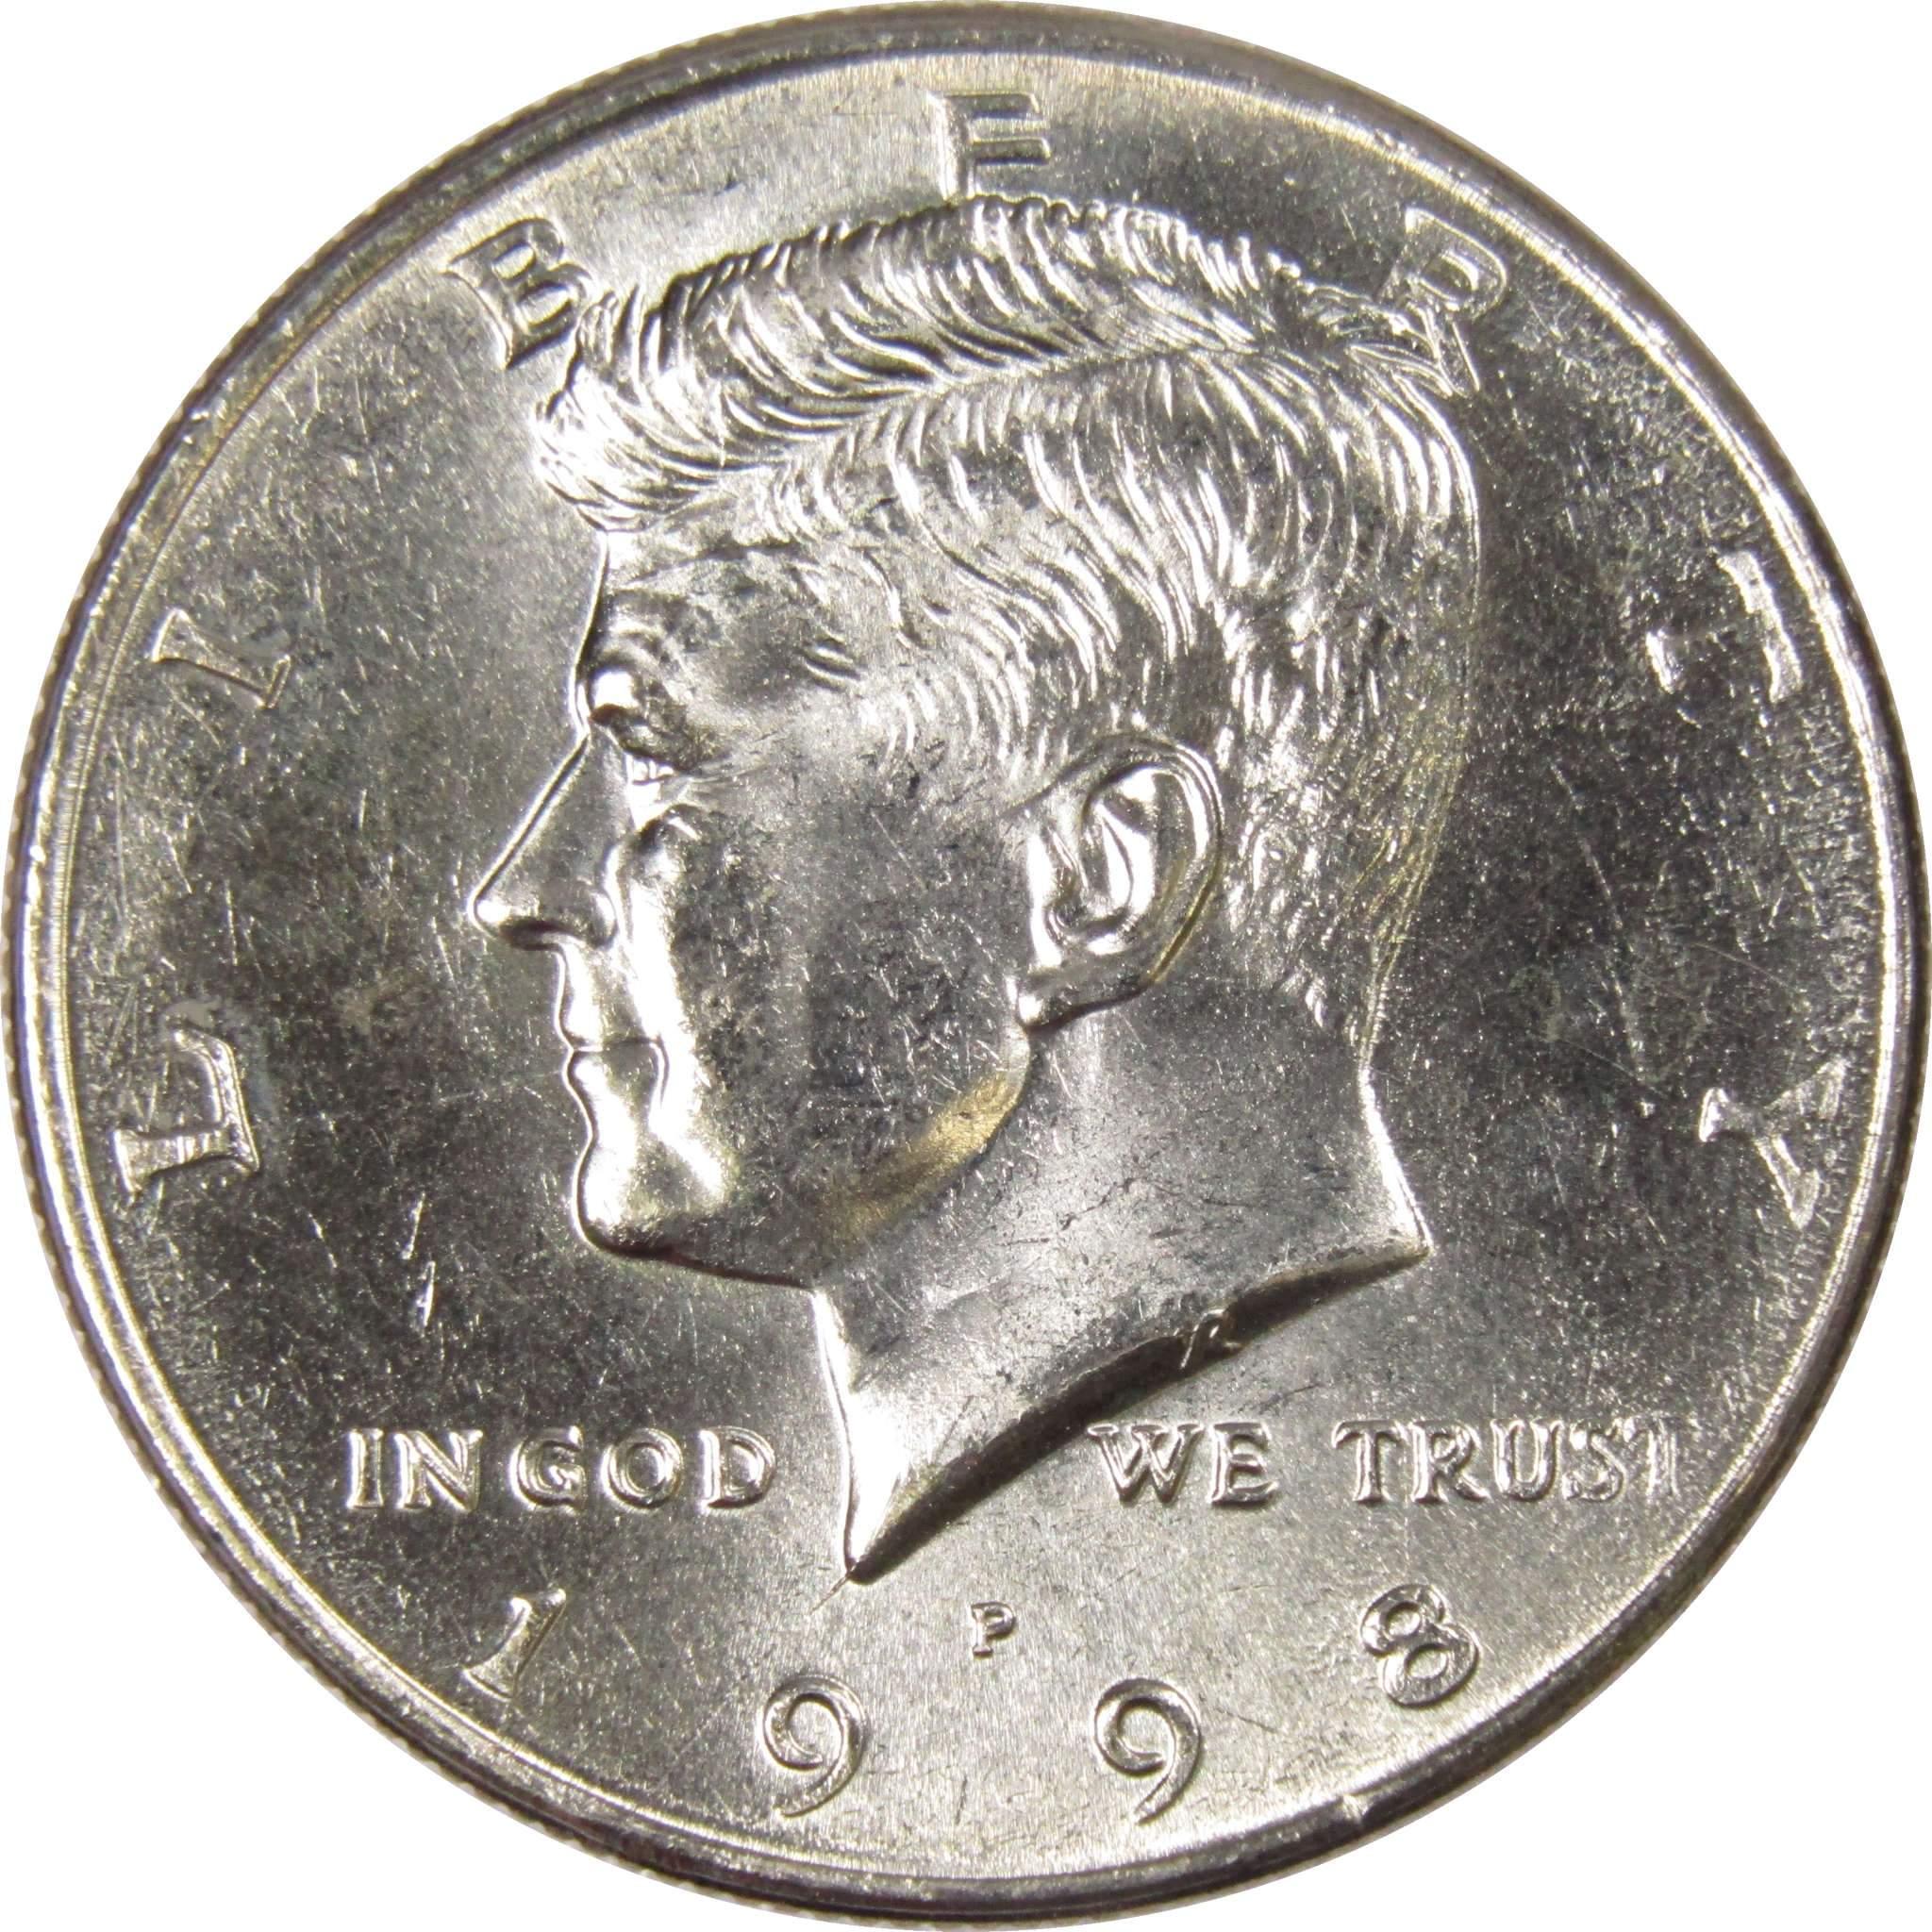 1998 P Kennedy Half Dollar BU Uncirculated Mint State 50c US Coin Collectible